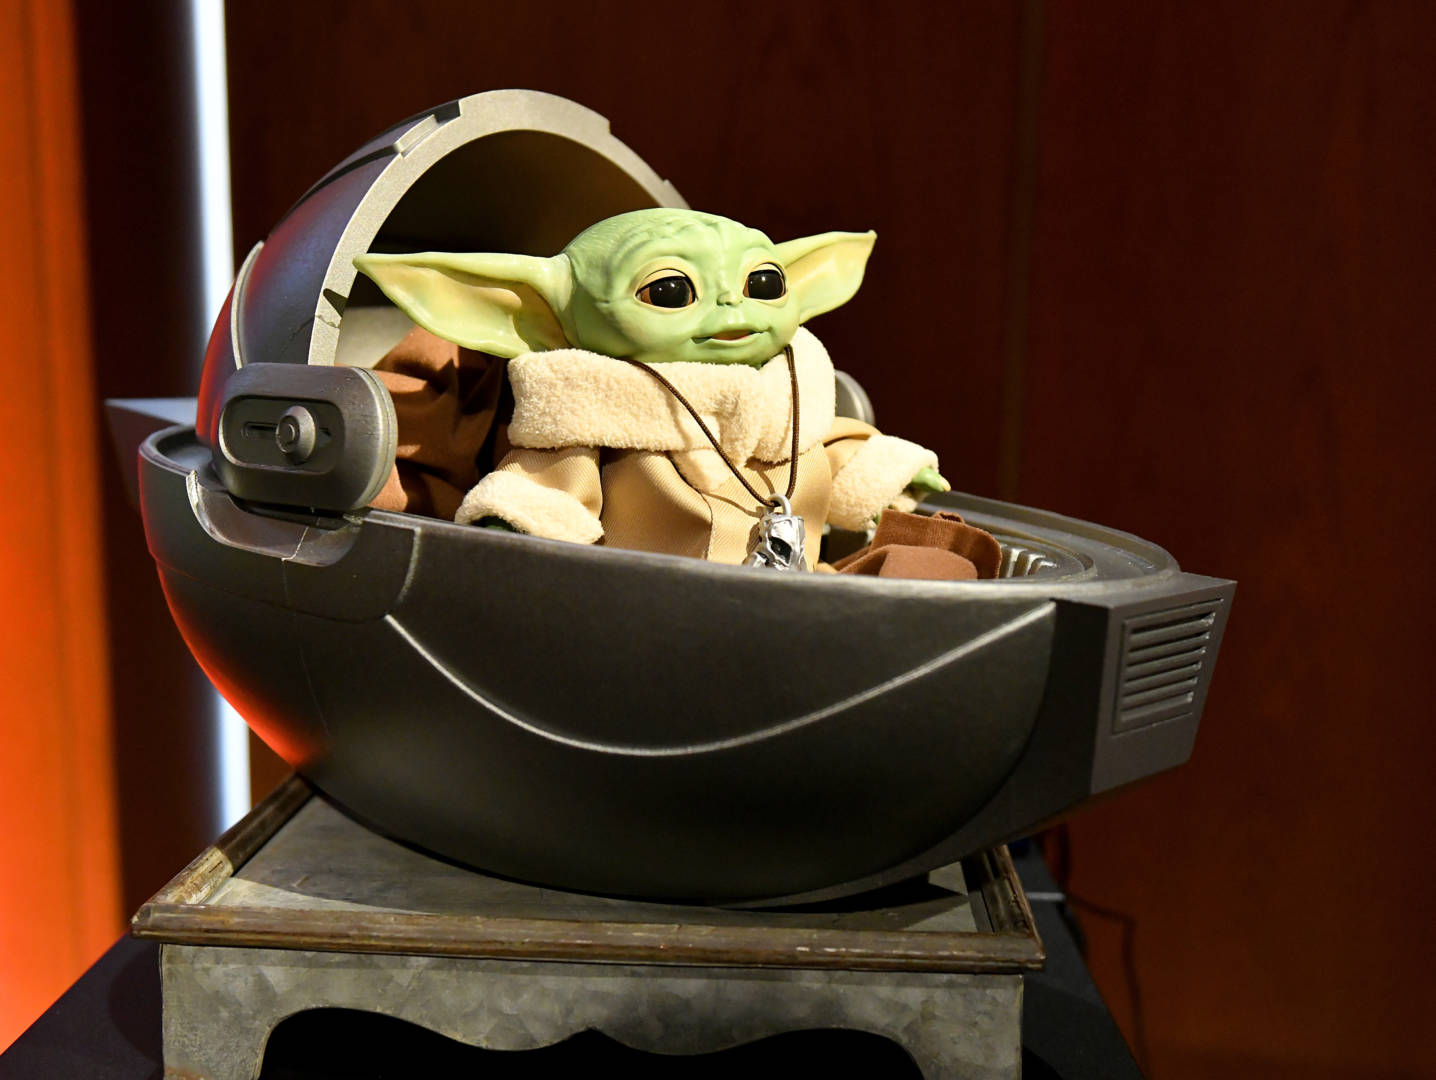 The Baby Yoda toys are finally arriving. Here's a sneak peek.